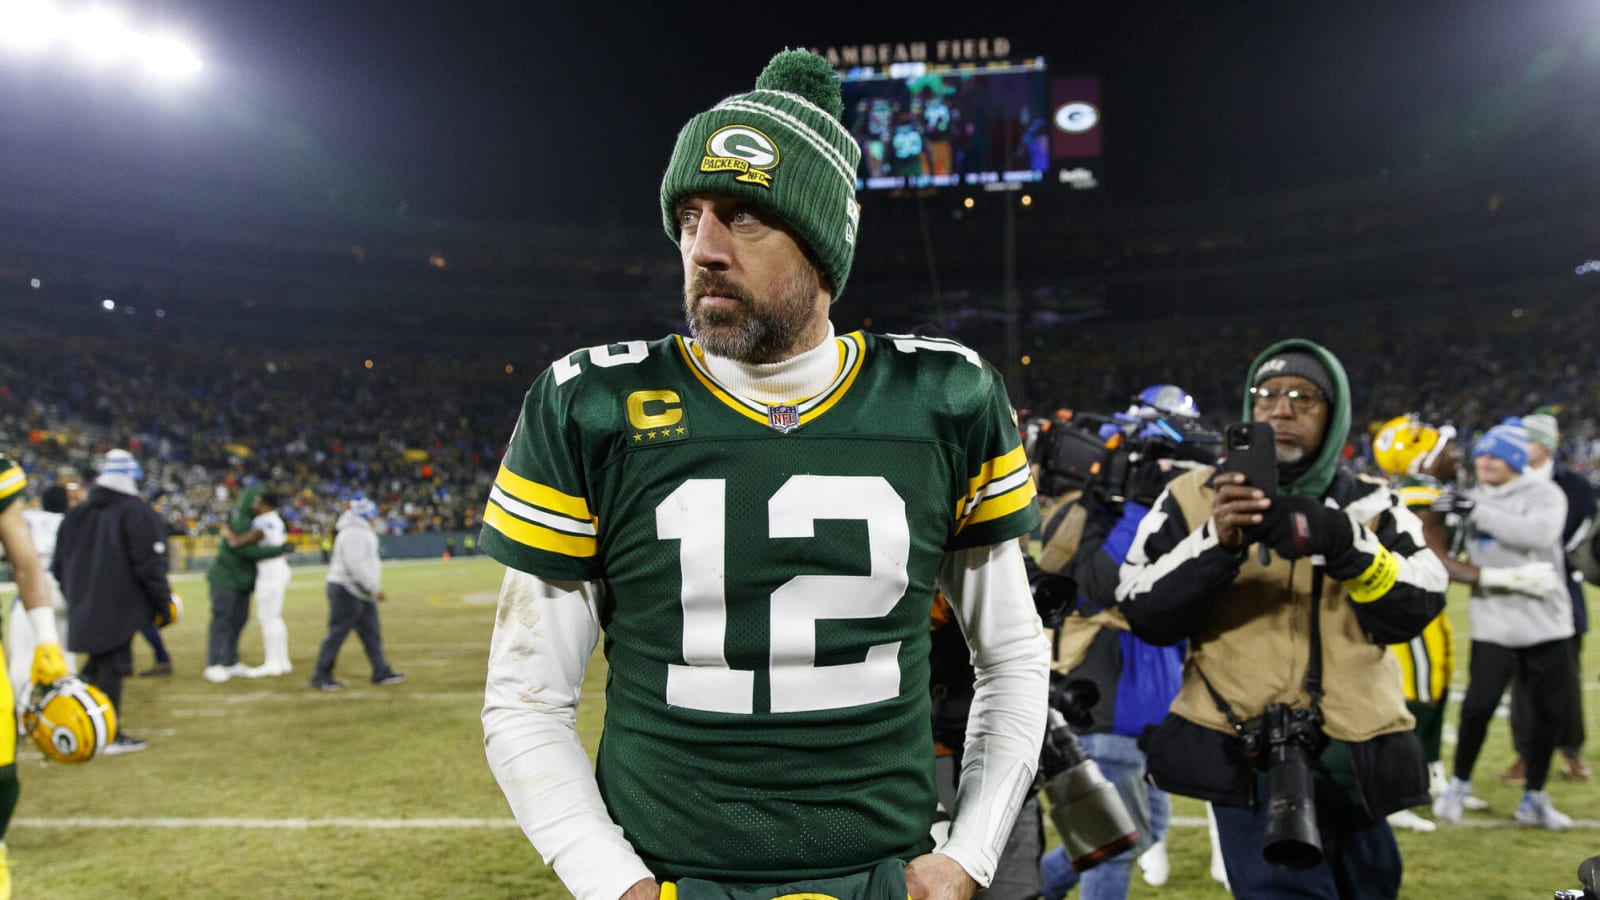 Mike Greenberg: Jets could 'have a shot' at the Super Bowl next year with Aaron Rodgers